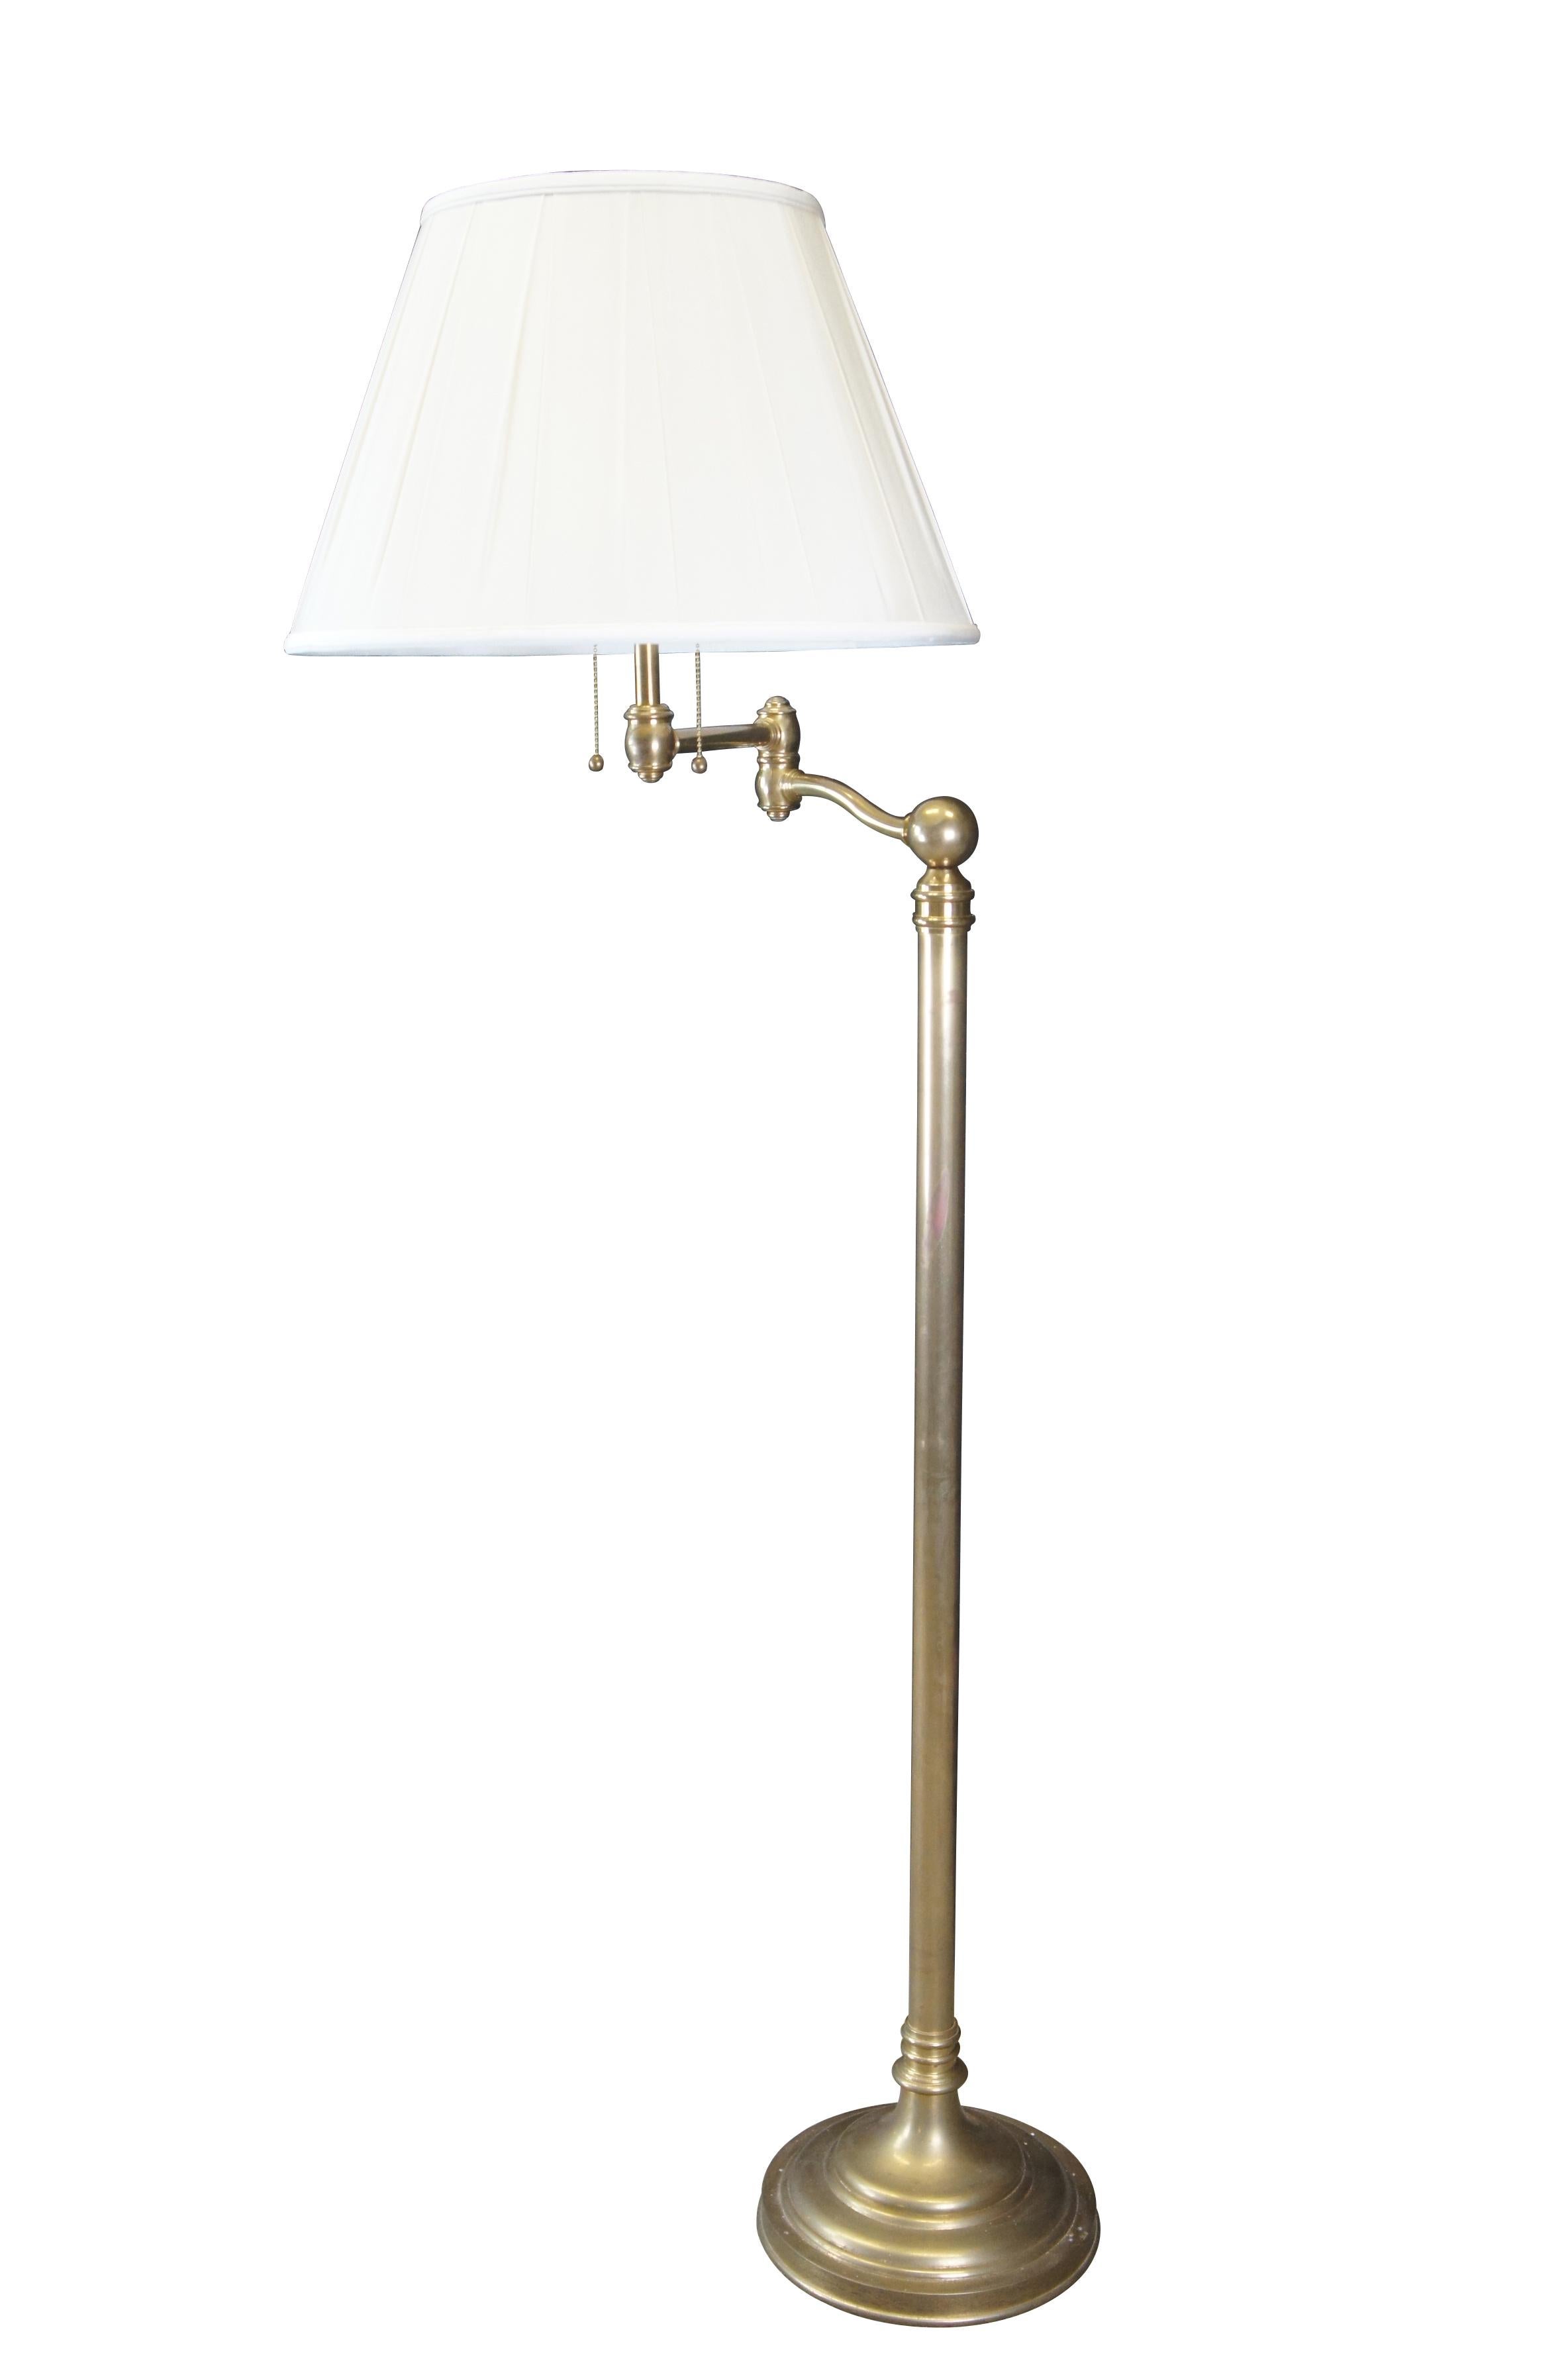 2 Ralph Lauren Antique Brass Sargent Swing Arm Floor Lamps Reading Light Pair In Good Condition For Sale In Dayton, OH